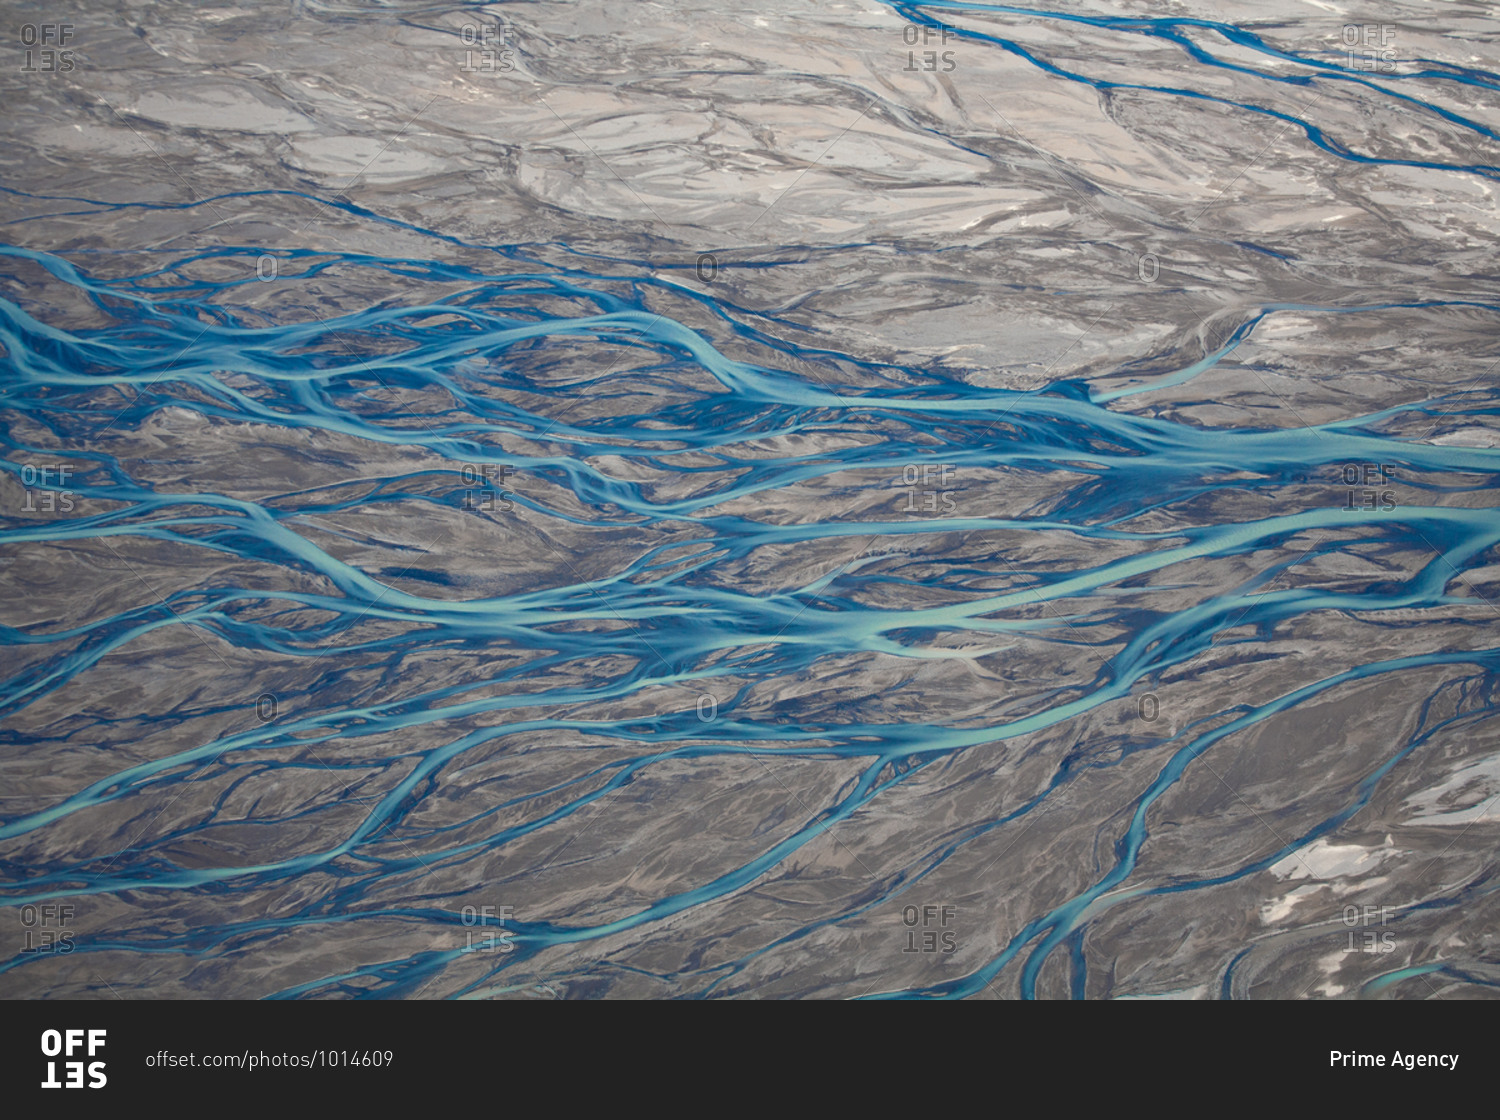 Rivers and streams running through rural Iceland seen from the sky